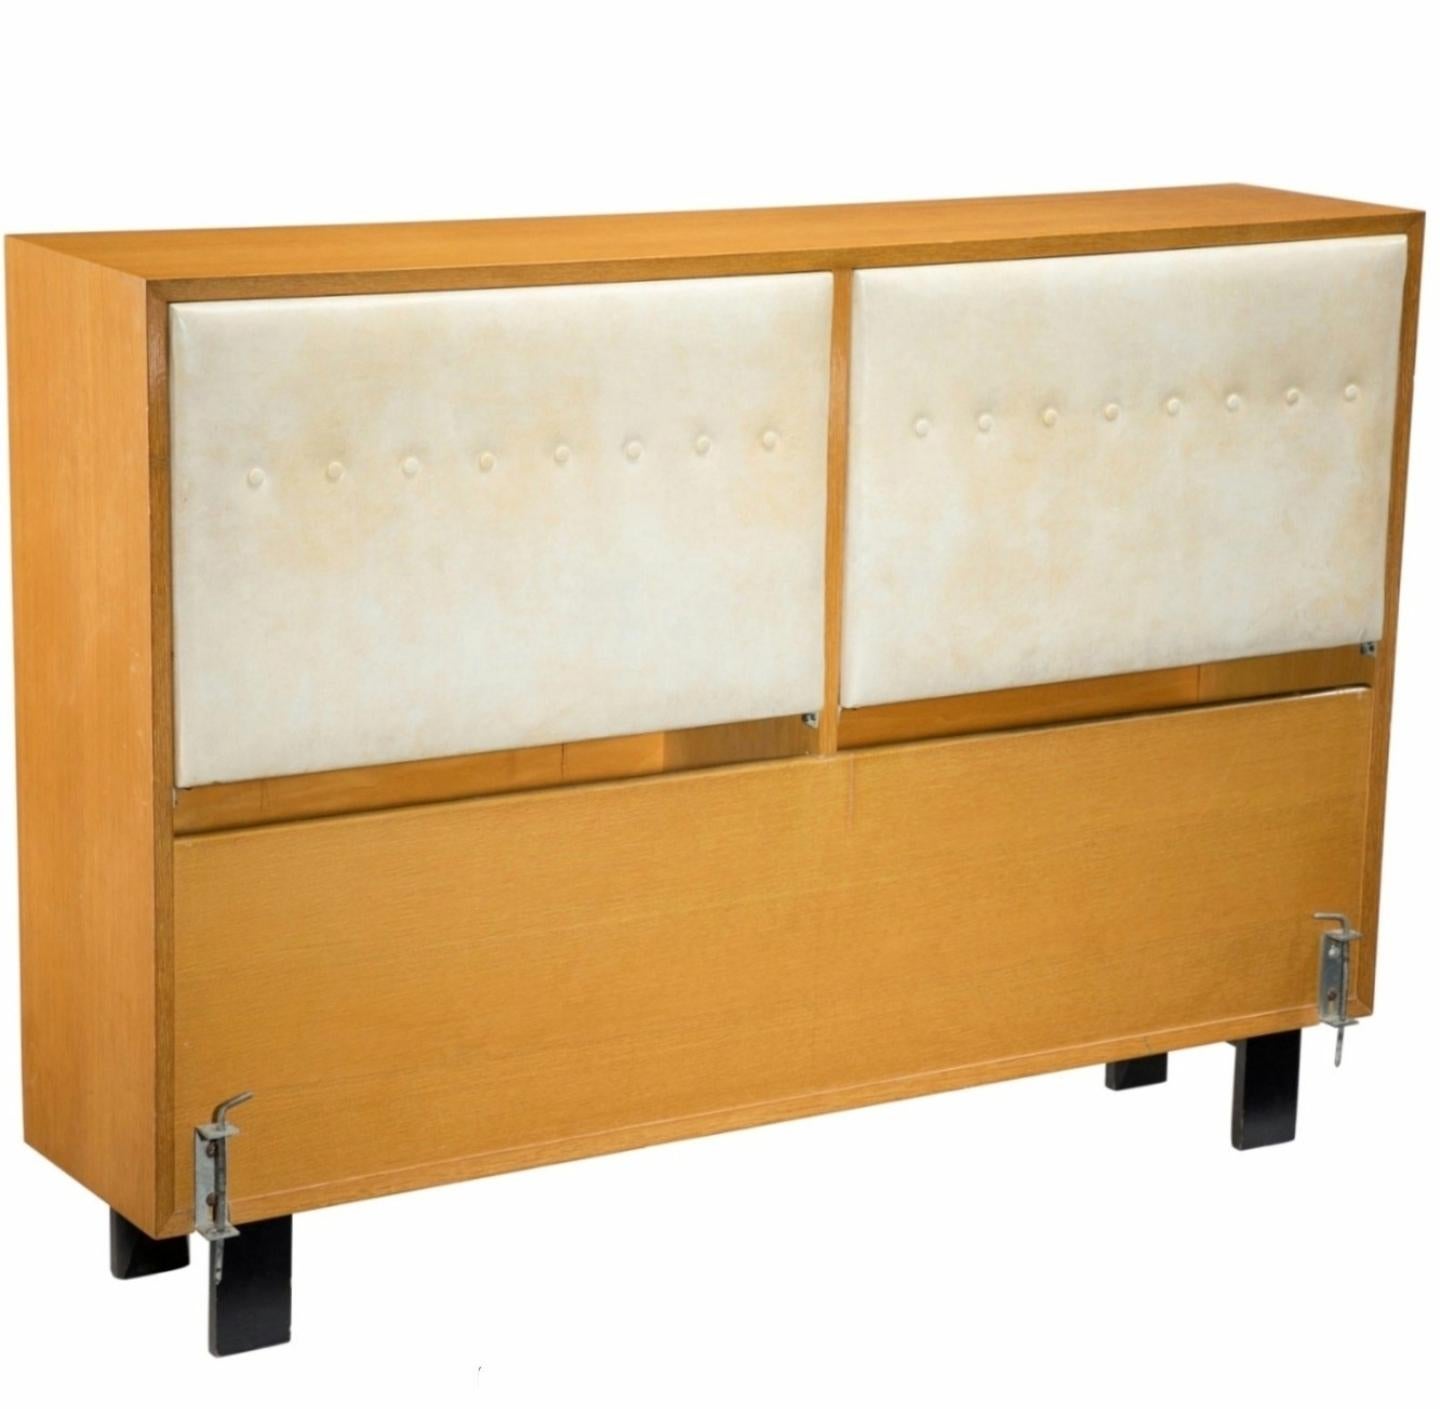 A rare American Mid-Century Modern headboard for a double (full) size bed with storage and adjustable backrests by important Modernist architect and designer George Nelson (American, 1908-1986) for Herman Miller, circa 1950, model 4647 from the